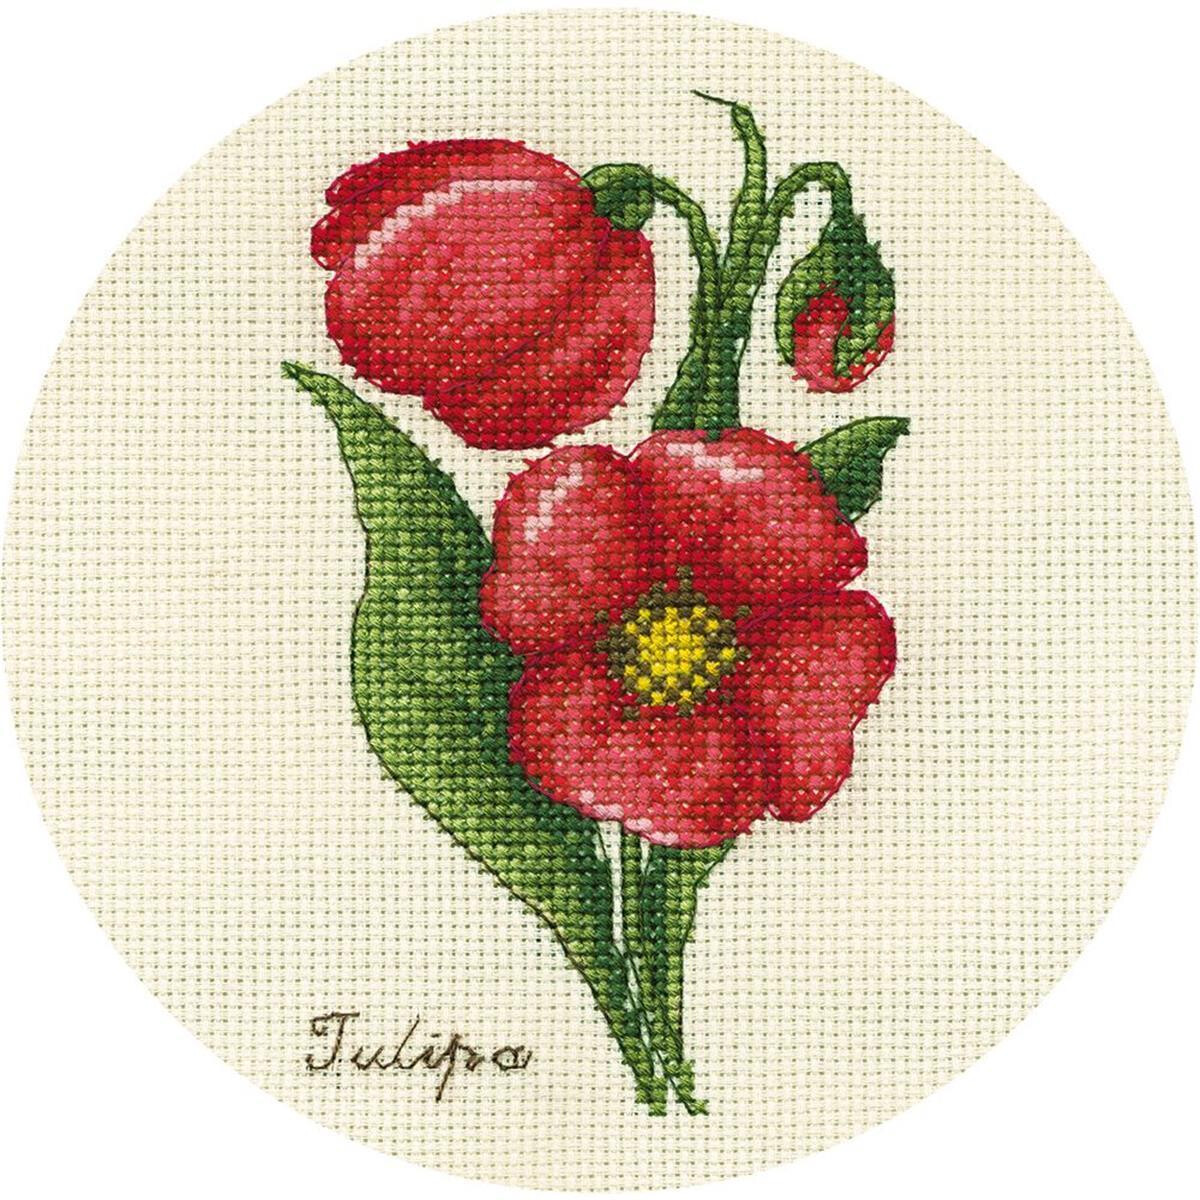 Panna counted cross stitch kit "Small Bunch of...